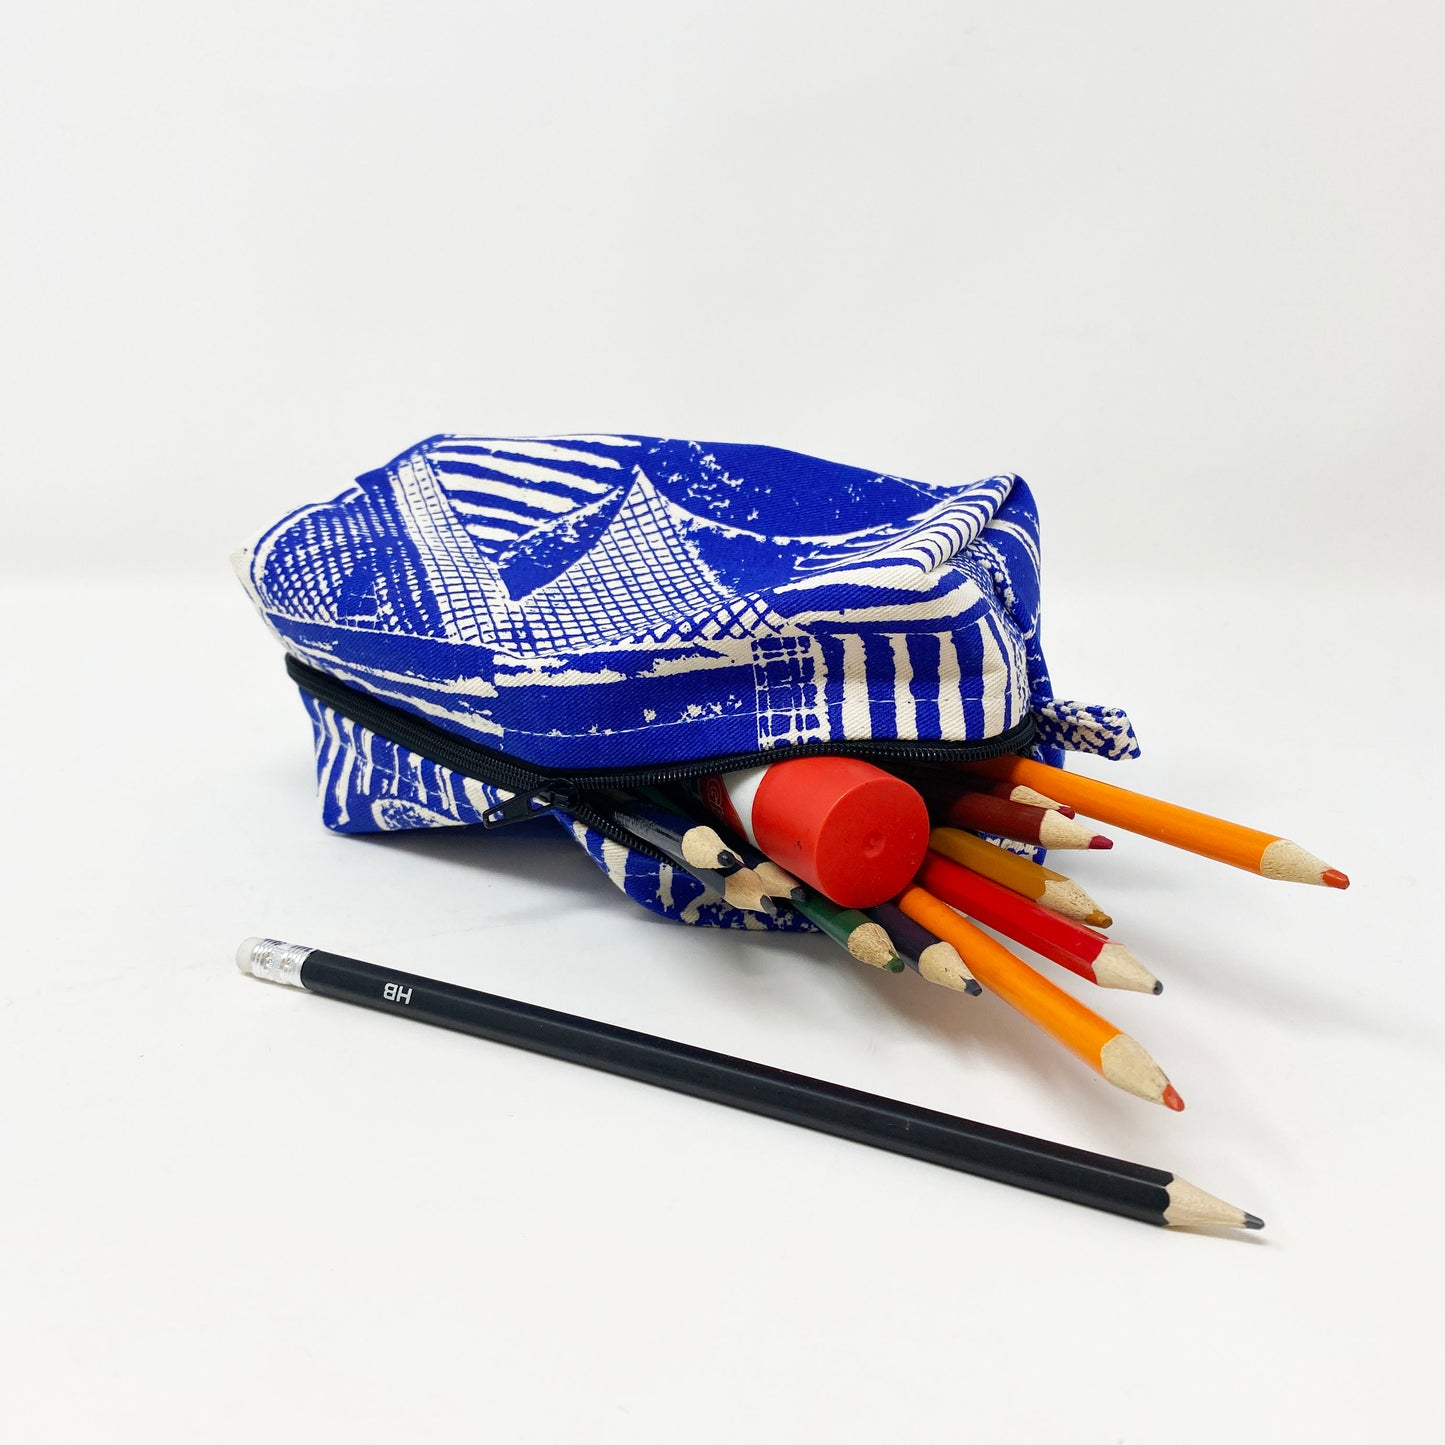 The Art House Fabric Pouch